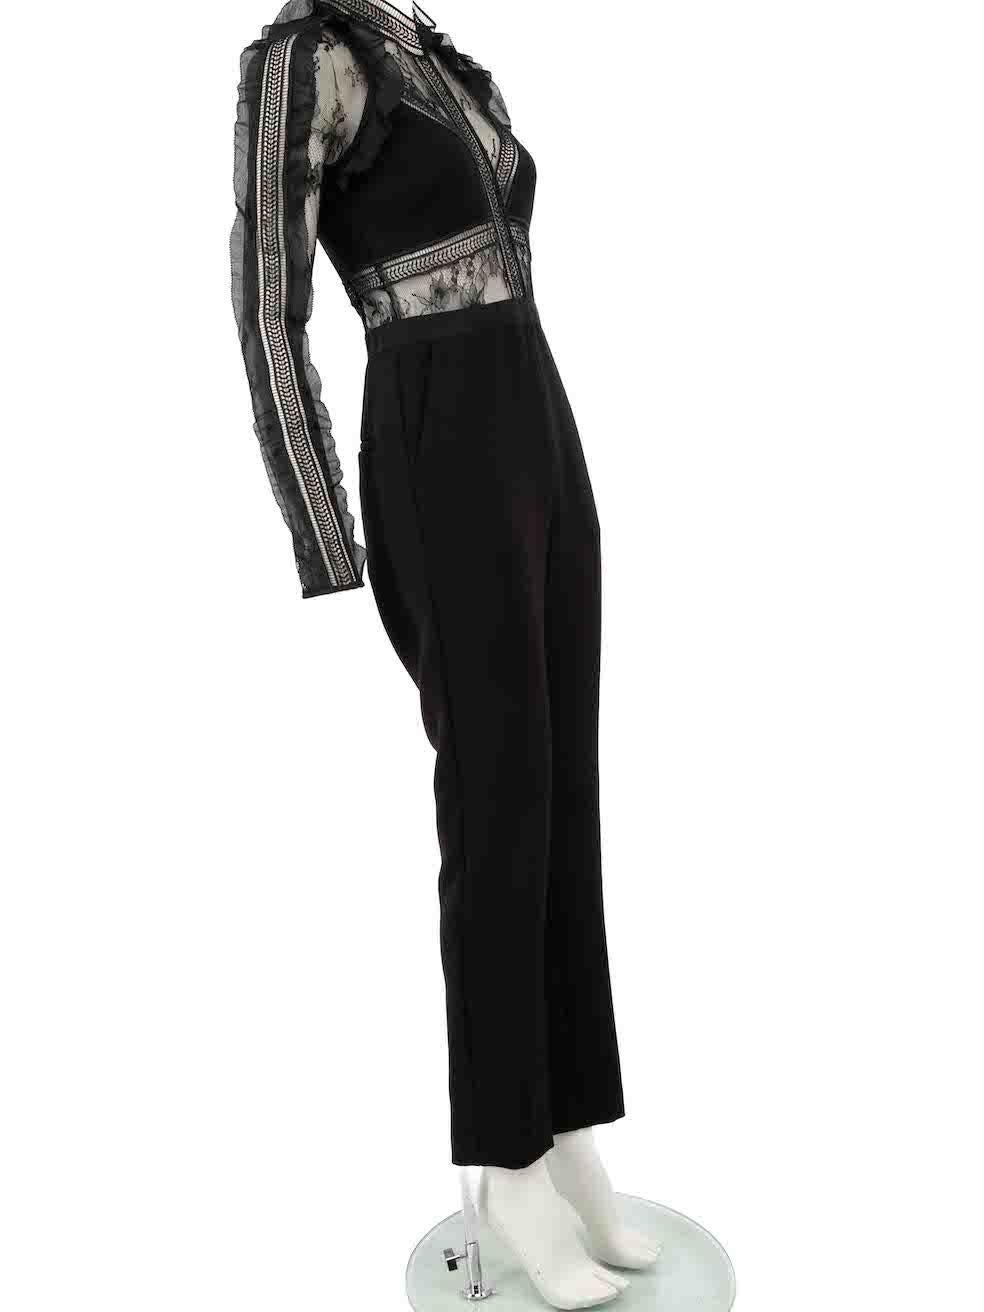 CONDITION is Very good. Hardly any visible wear to jumpsuit is evident on this used Self-Portrait designer resale item.
 
 
 
 Details
 
 
 Black
 
 Polyester
 
 Jumpsuit
 
 Sheer lace panel
 
 Long sleeves
 
 Back zip and hook fastening
 
 Mock